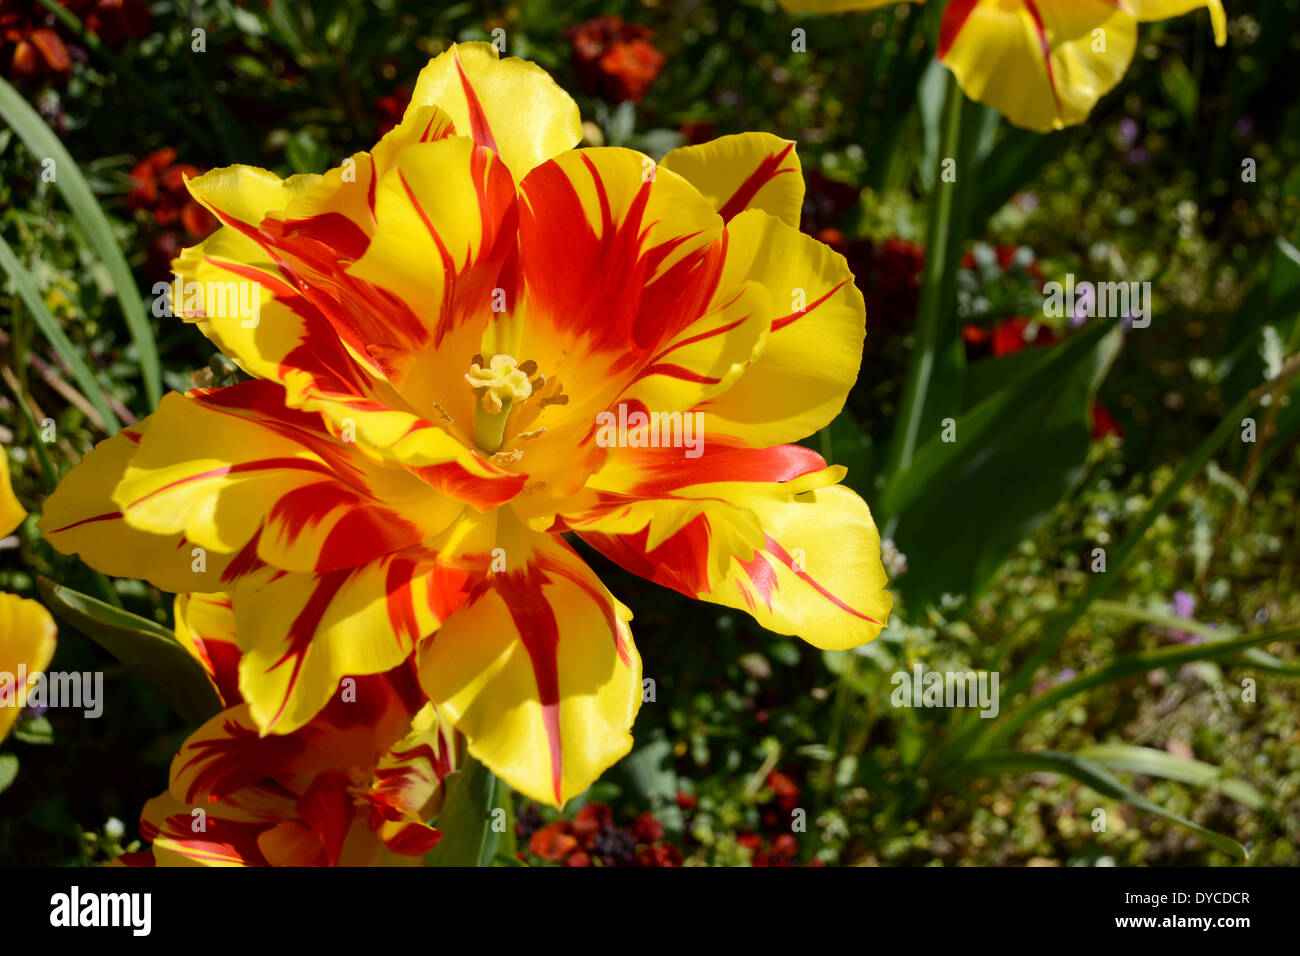 Closeup of a double early Monsella tulip blooming in a flower bed Stock Photo